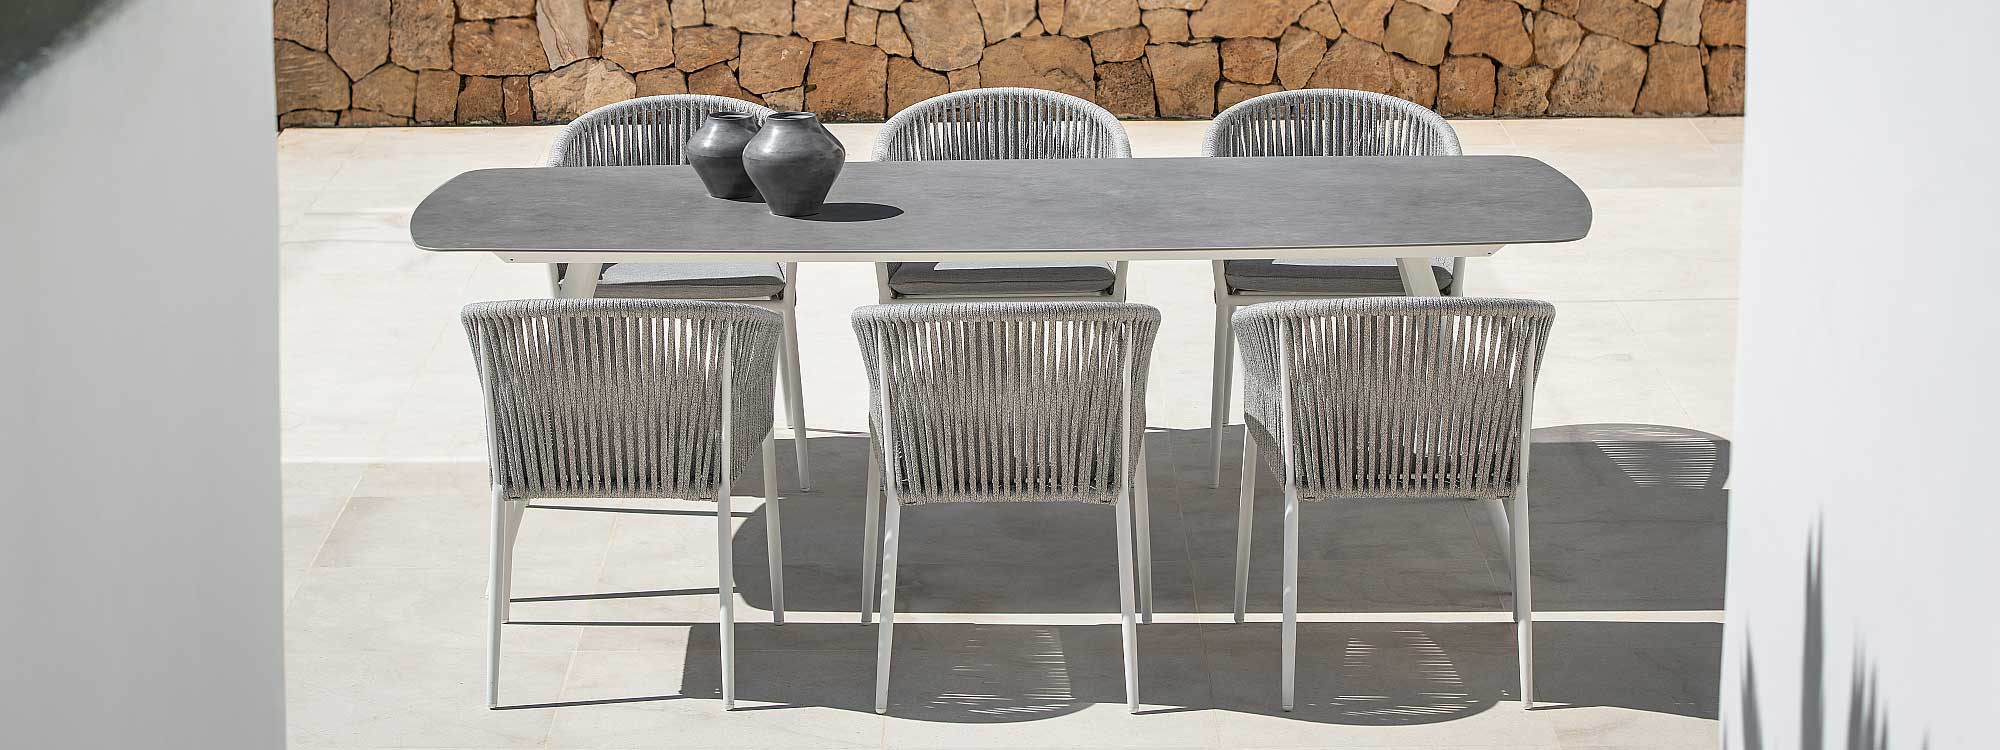 Image of Fortuna Rope white-grey garden chairs around Amazone oval garden table by Jati & Kebon